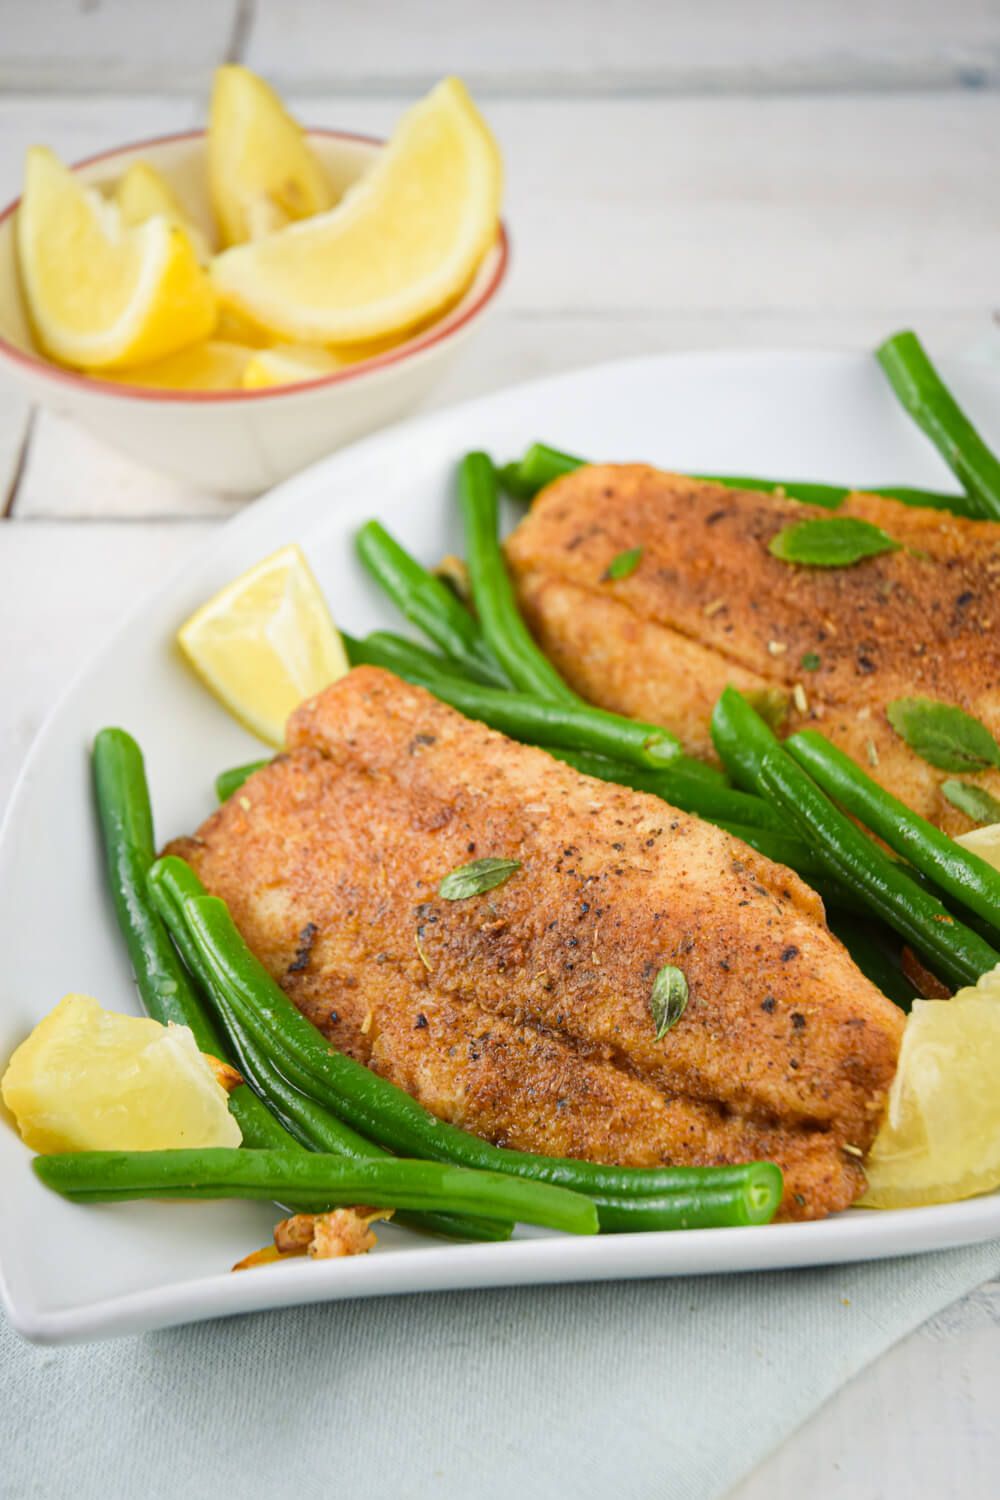 Seared tilapia with green beans and lemon on a plate.